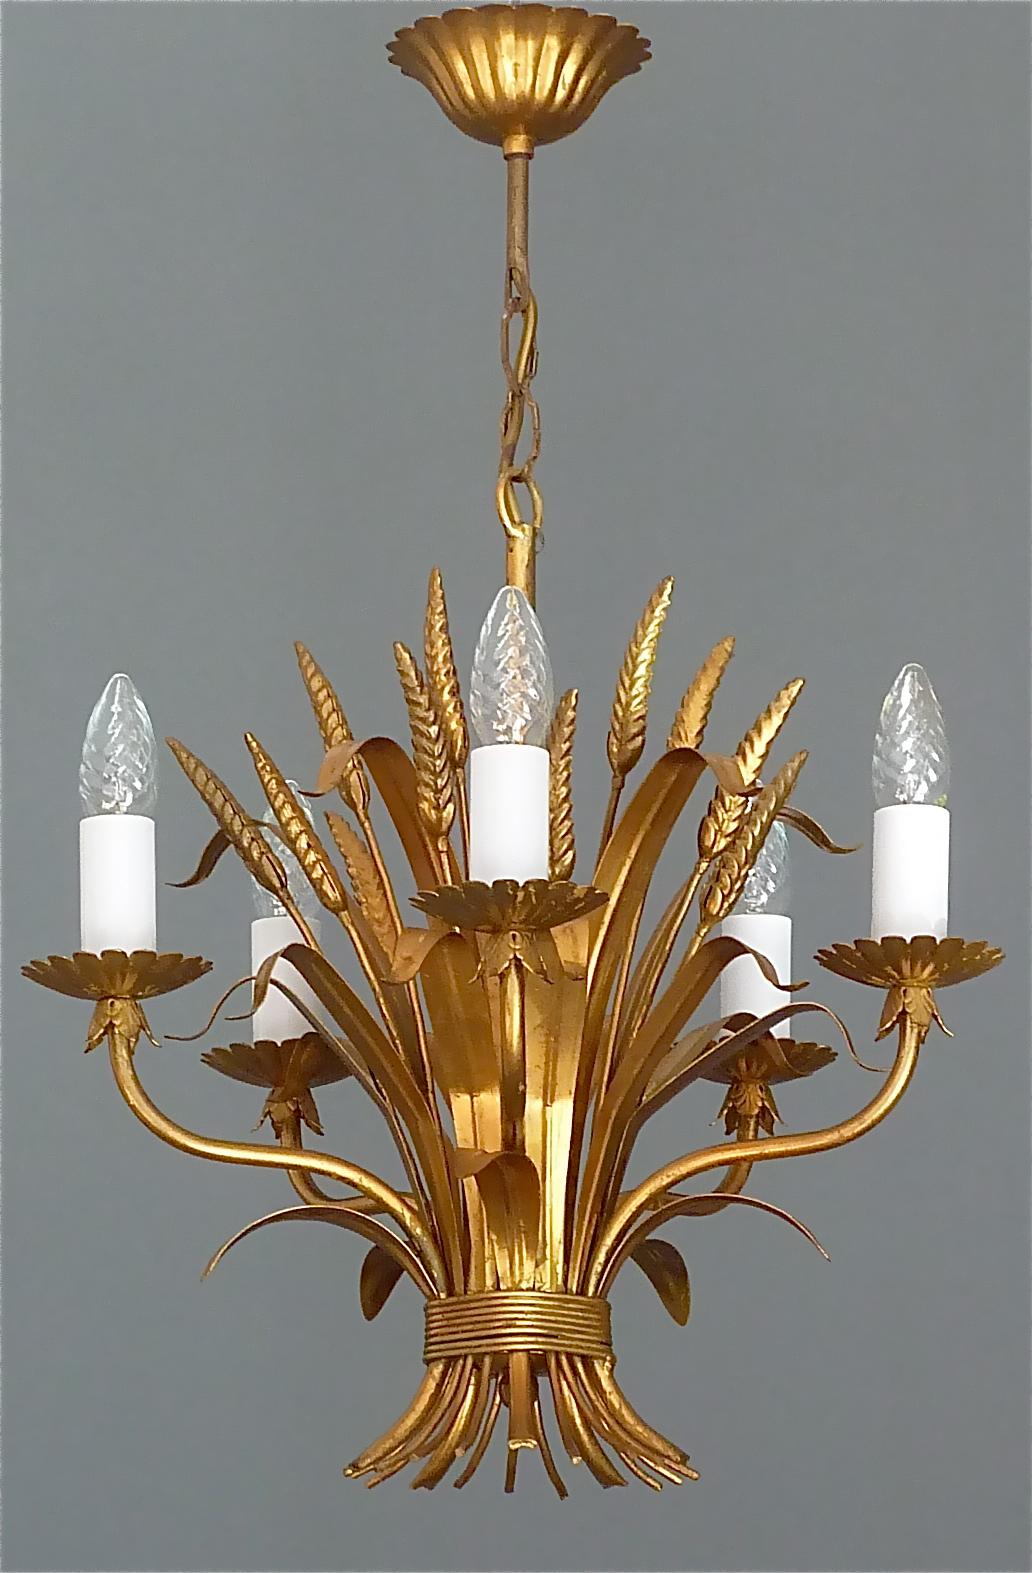 Gilt Italian Floral Sheaf of Wheat Five-Light Chandelier Coco Chanel Style, Kögl For Sale 10